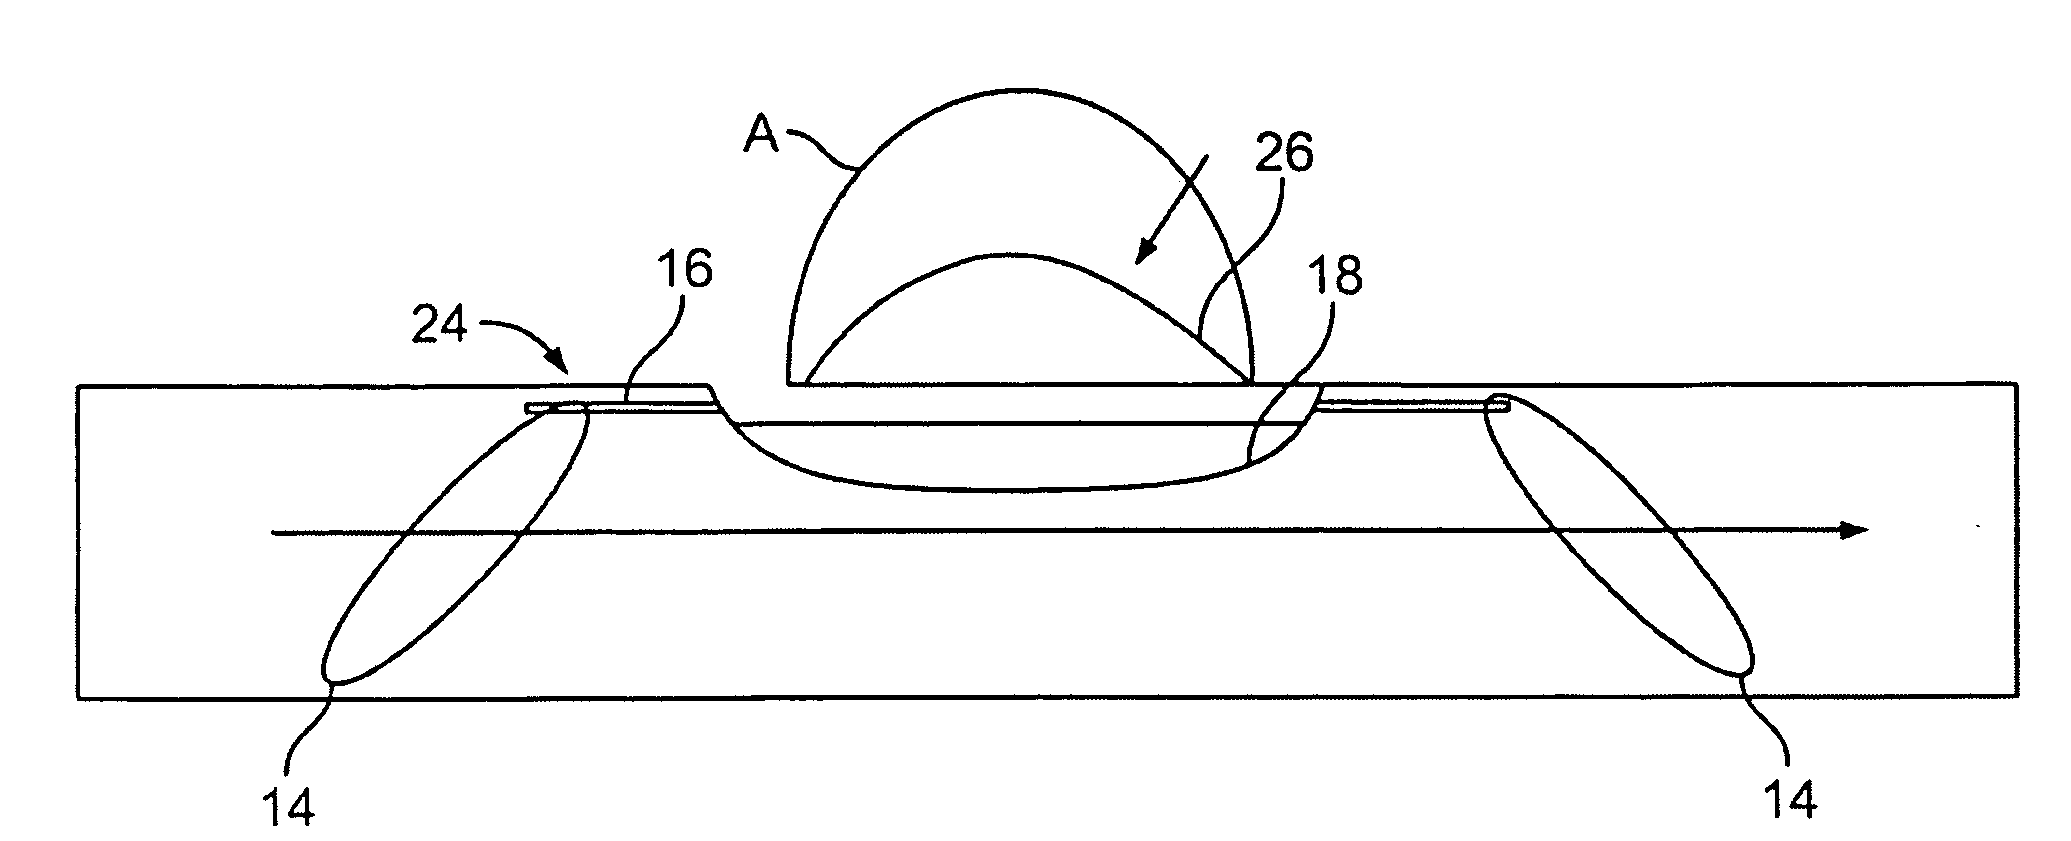 Aneurysm covering devices and delivery devices